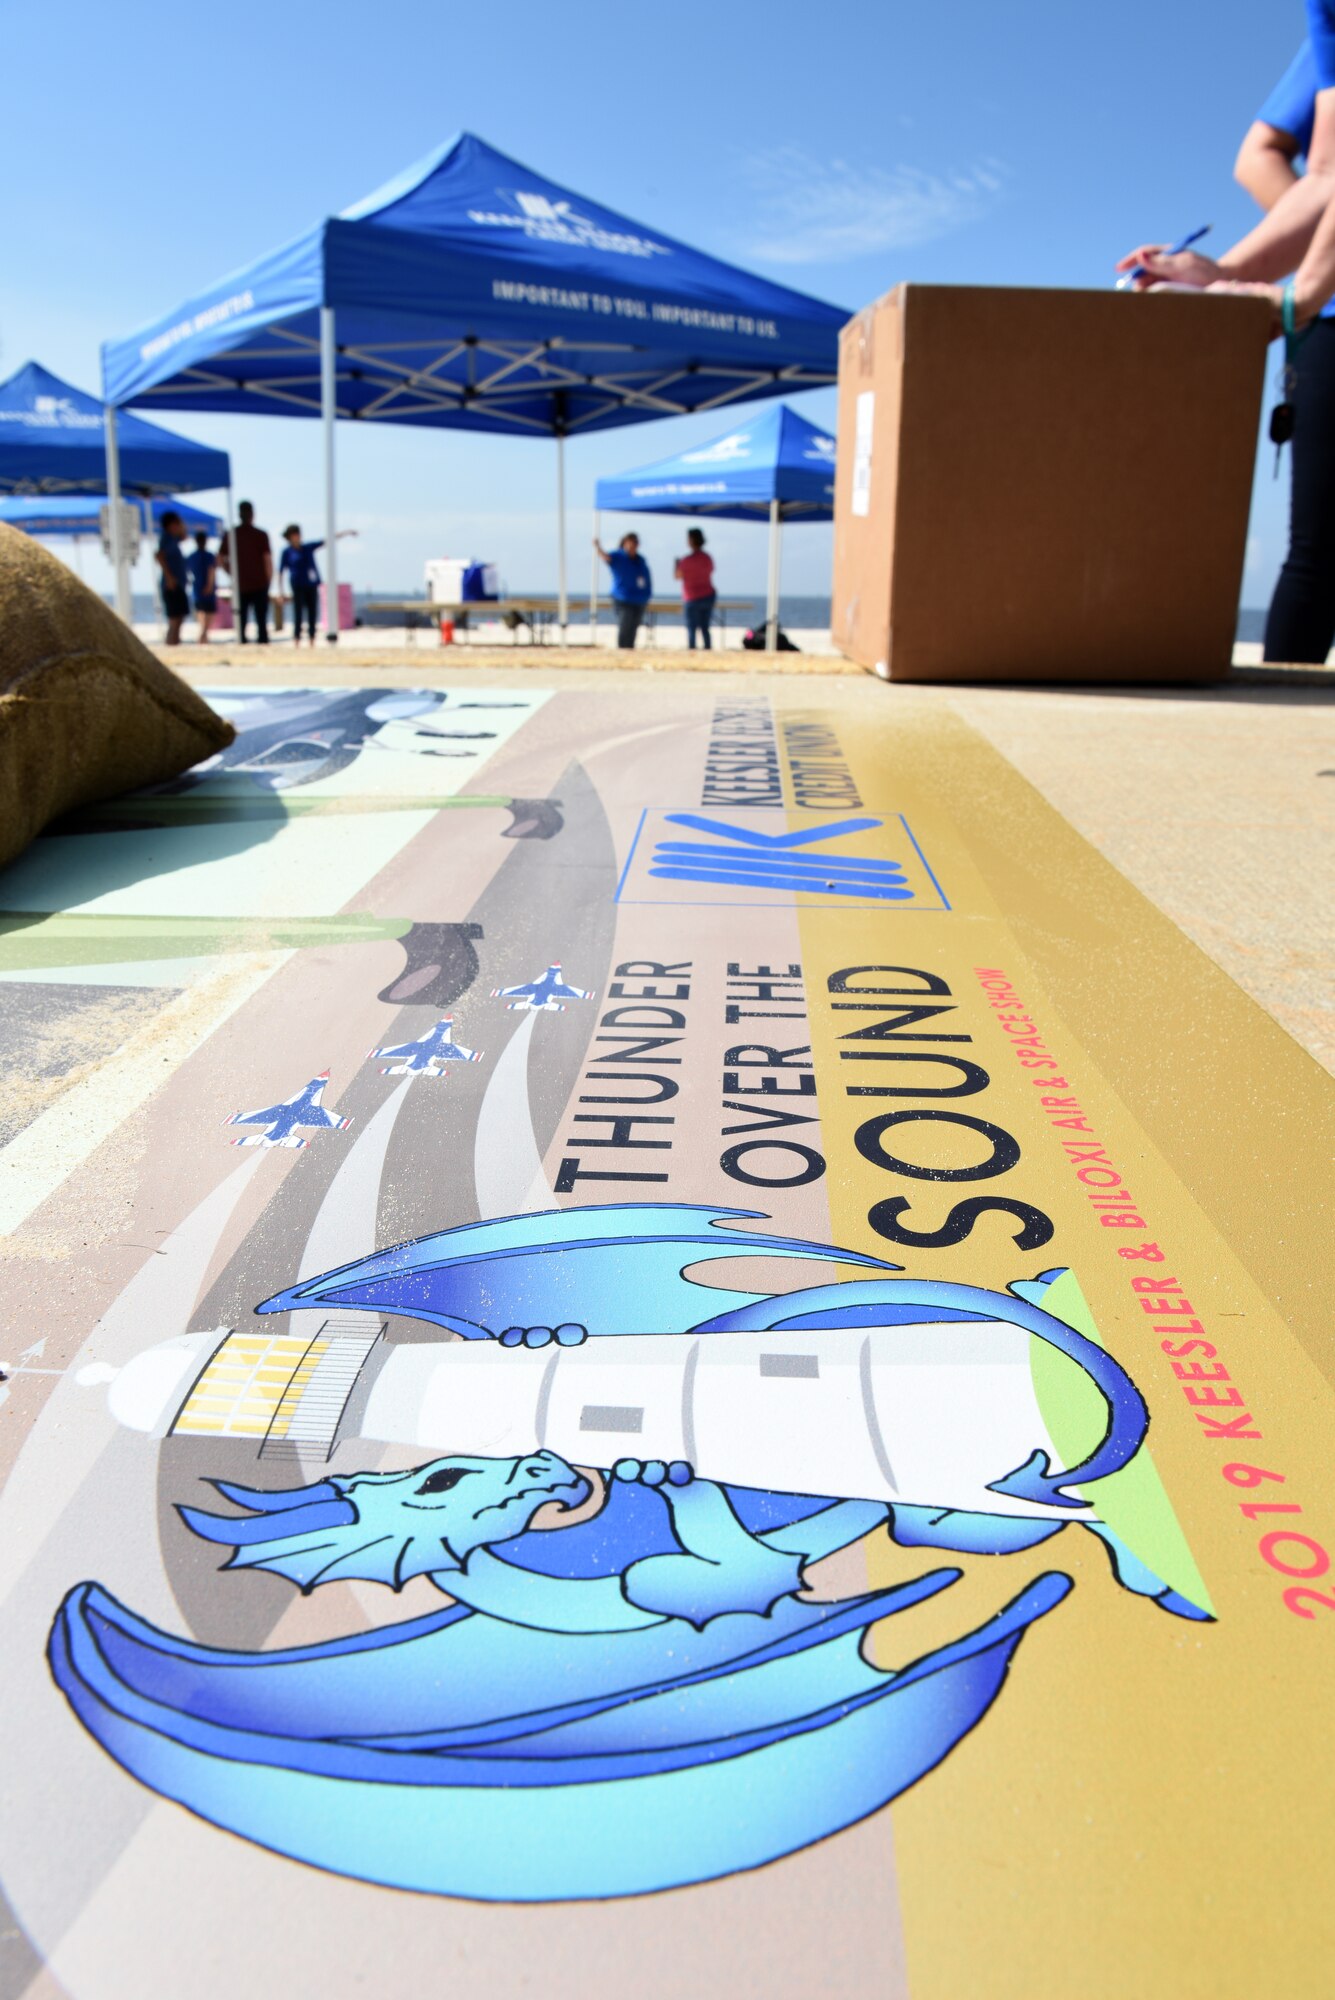 A Keesler Federal Credit Union air show themed board is displayed during set up for the Keesler and Biloxi Air and Space Show in Biloxi, Mississippi, May 3, 2019. Thunder Over the Sound is a unique, one-of-a-kind event where a base and its surrounding city jointly host one air show geographically separated. (U.S. Air Force photo by Senior Airman Jenay Randolph)